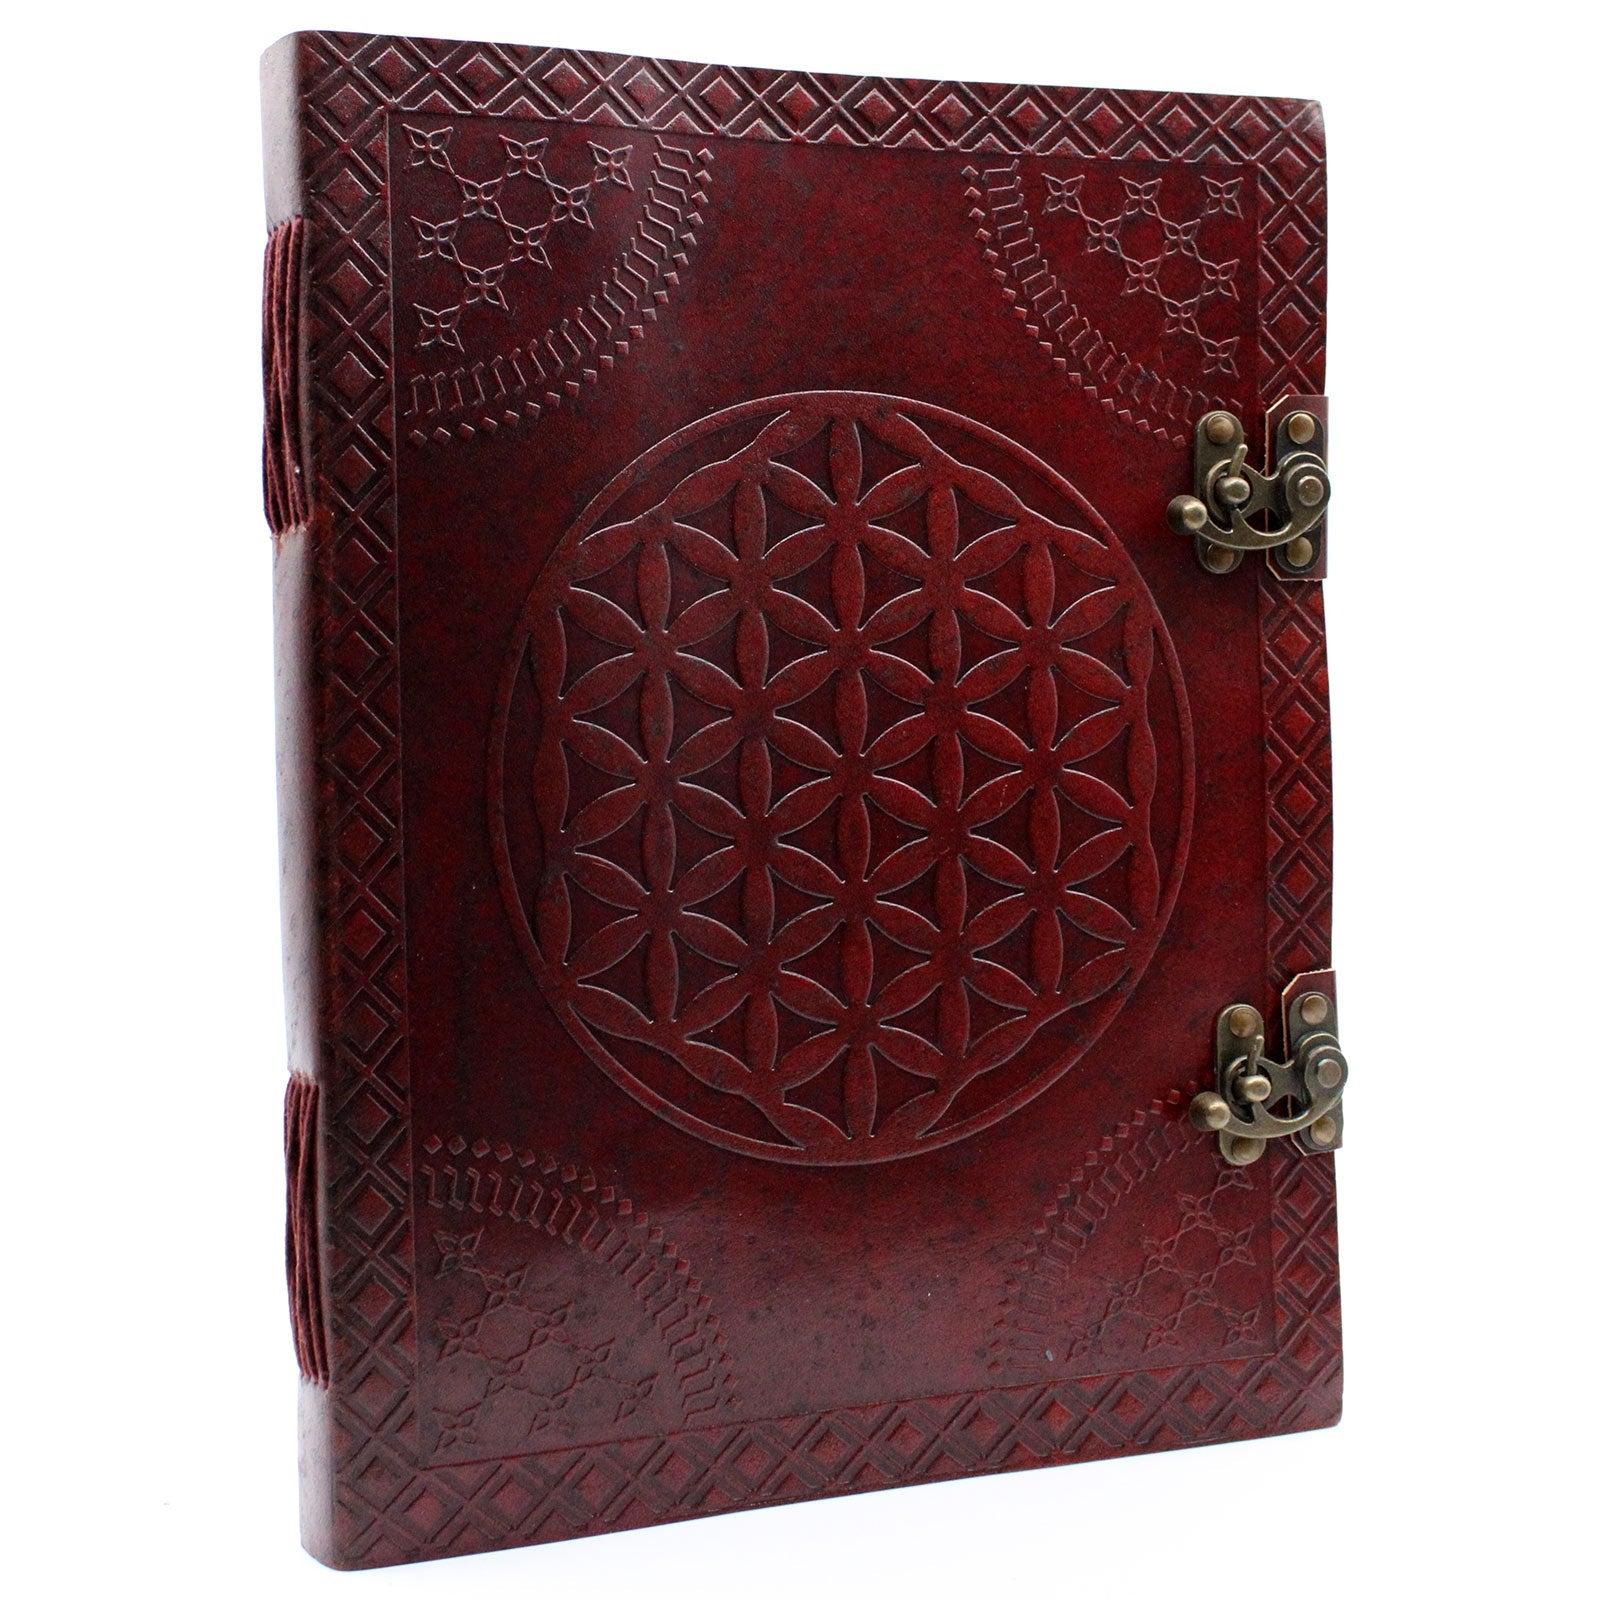 View Huge Flower of Life Leather Book 10x13 200 pages information